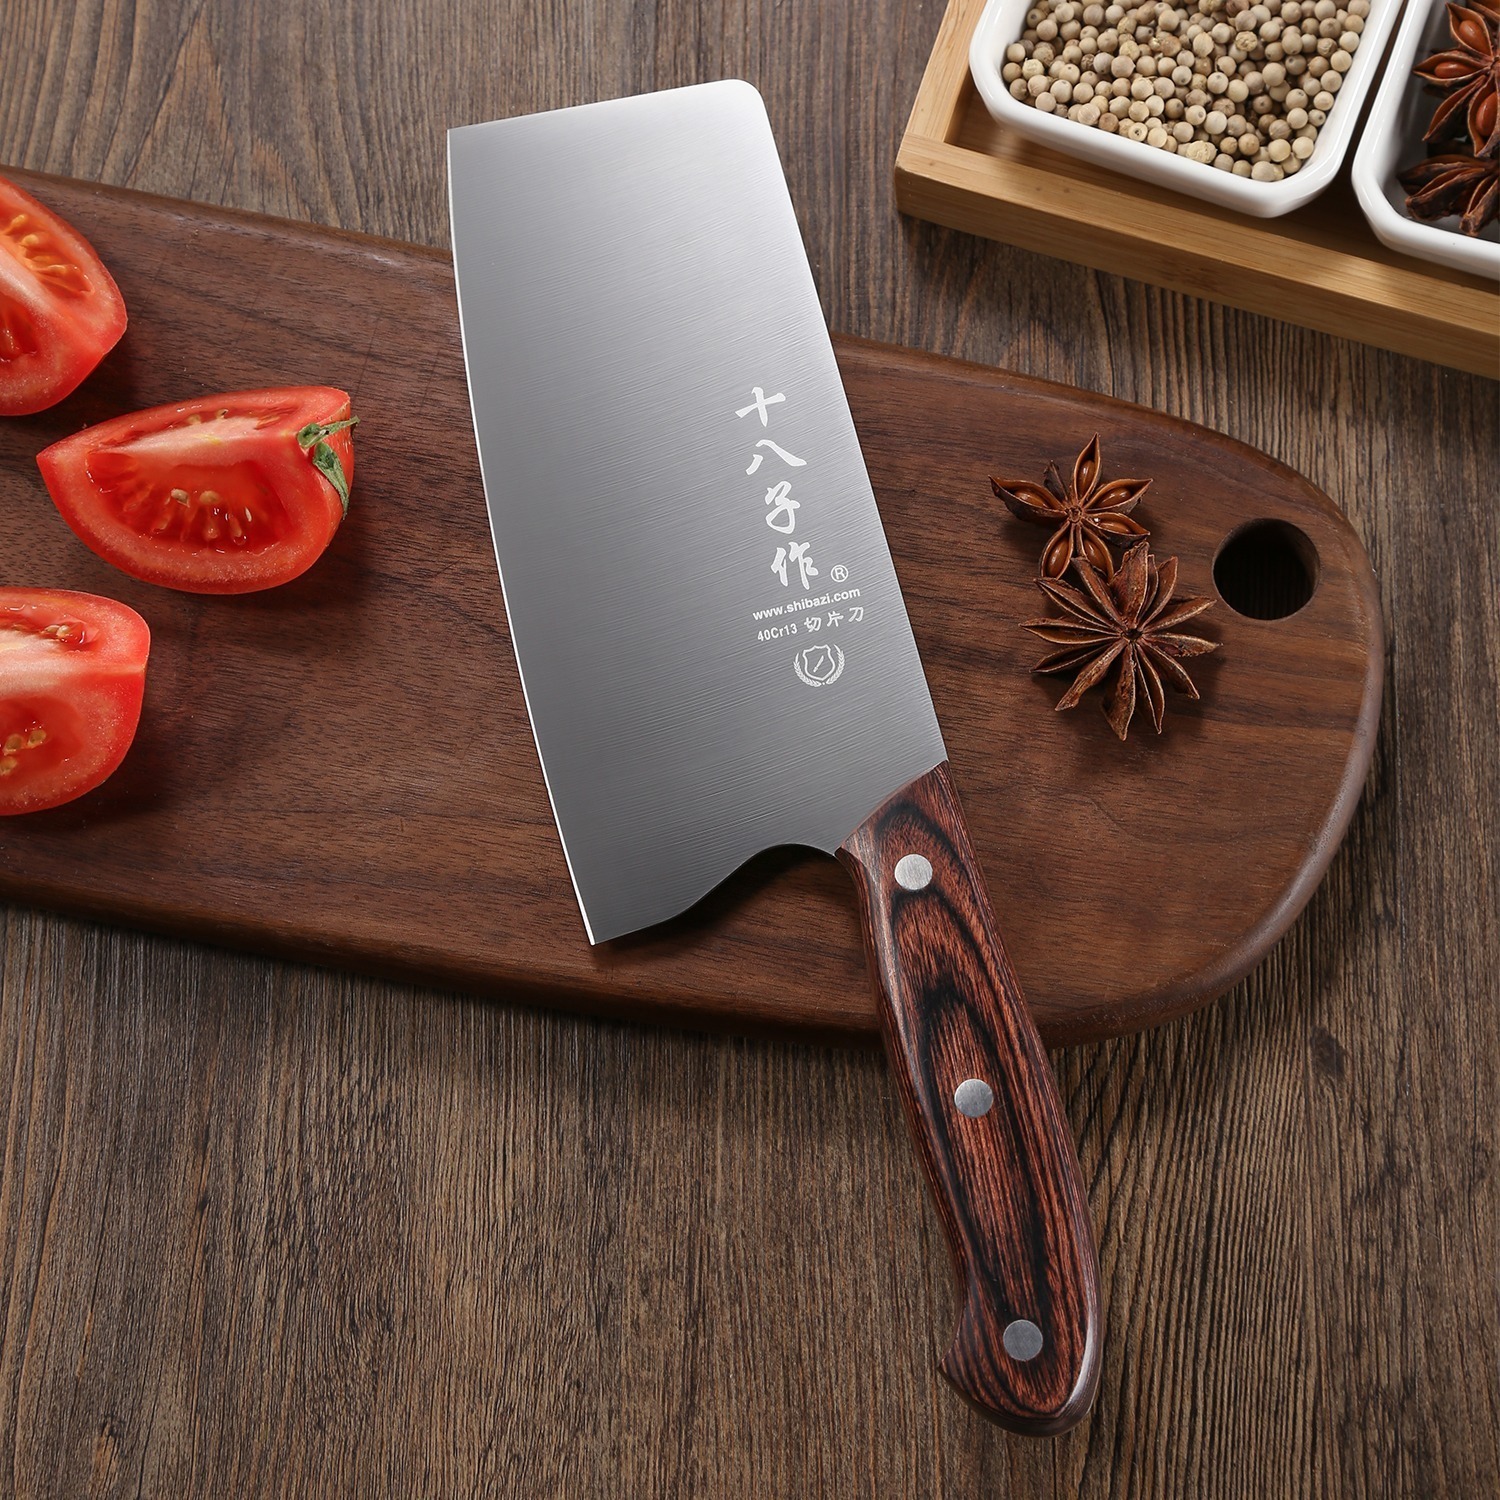 9-inch Kitchen Knife Professional Chef Stainless Steel SHI BA ZI ZUO